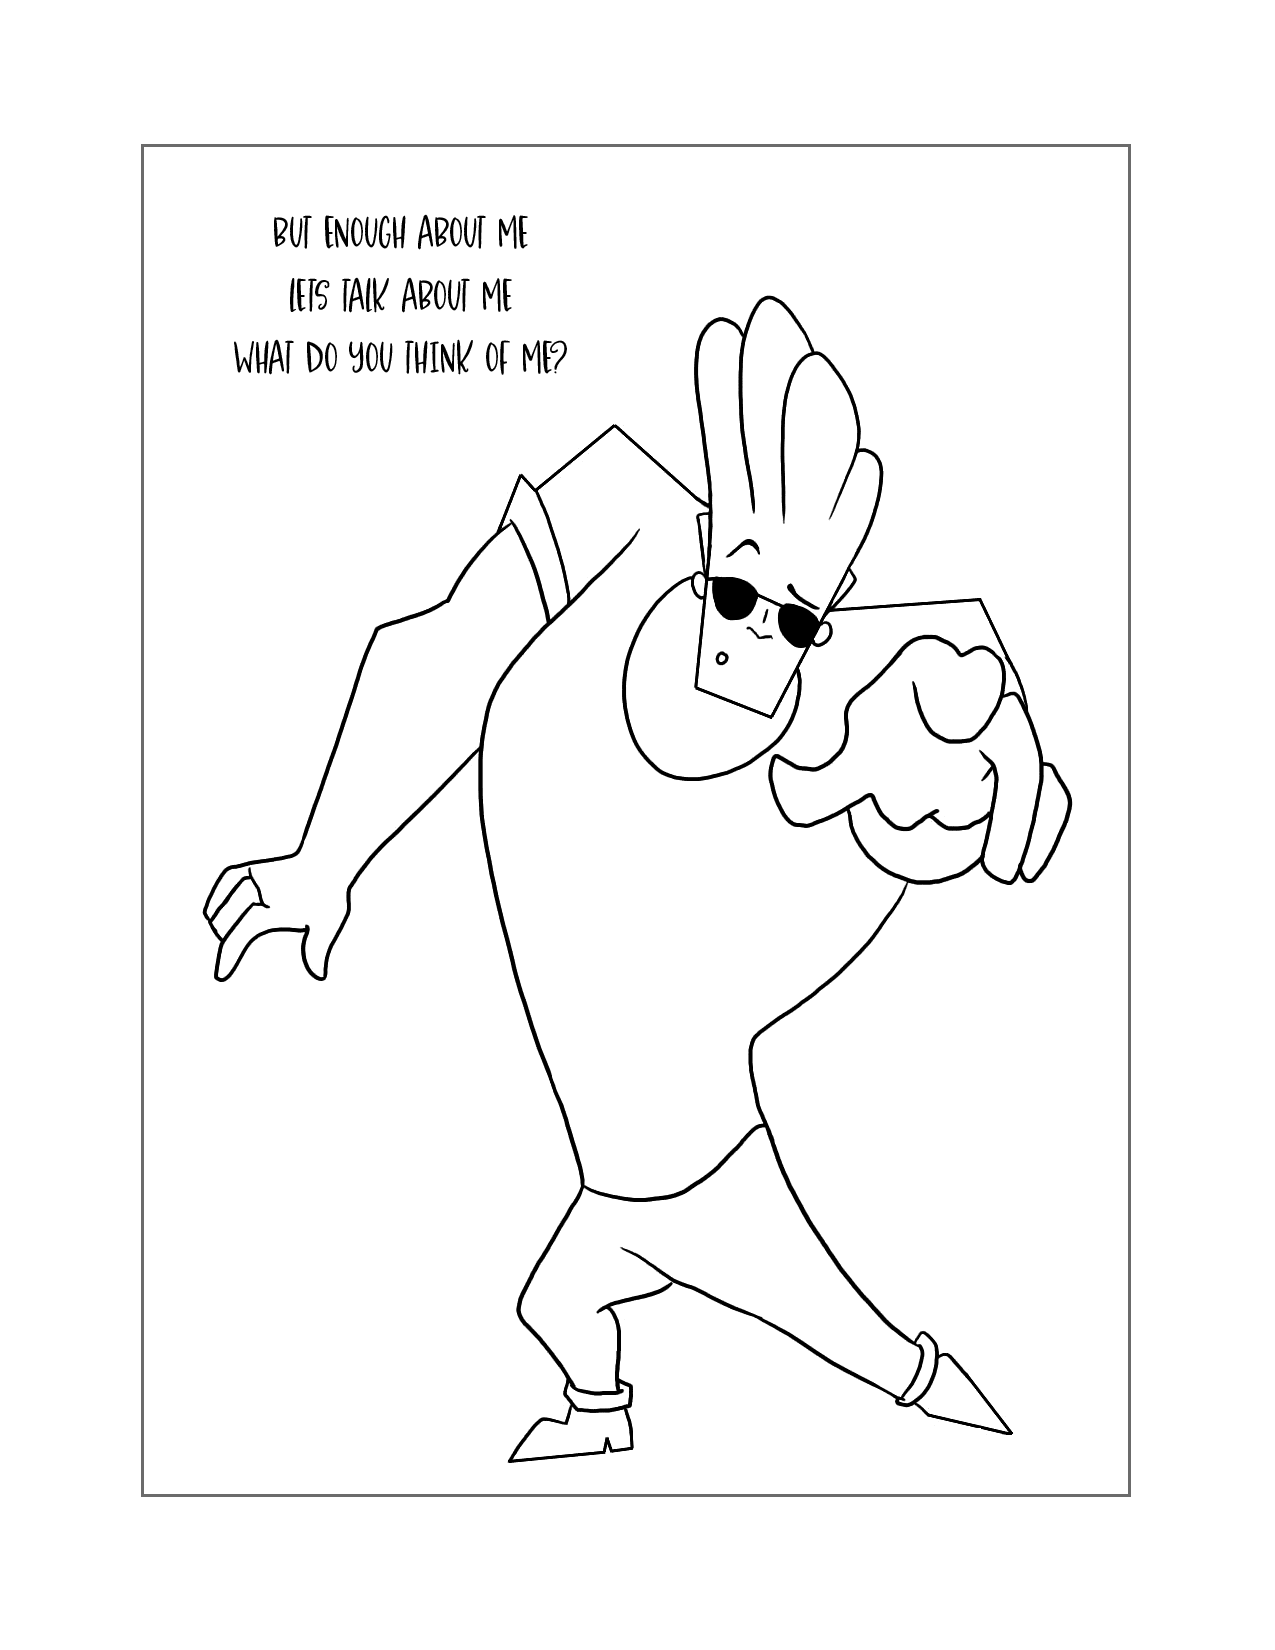 Johnny Bravo What Do You Think Of Me Coloring Page